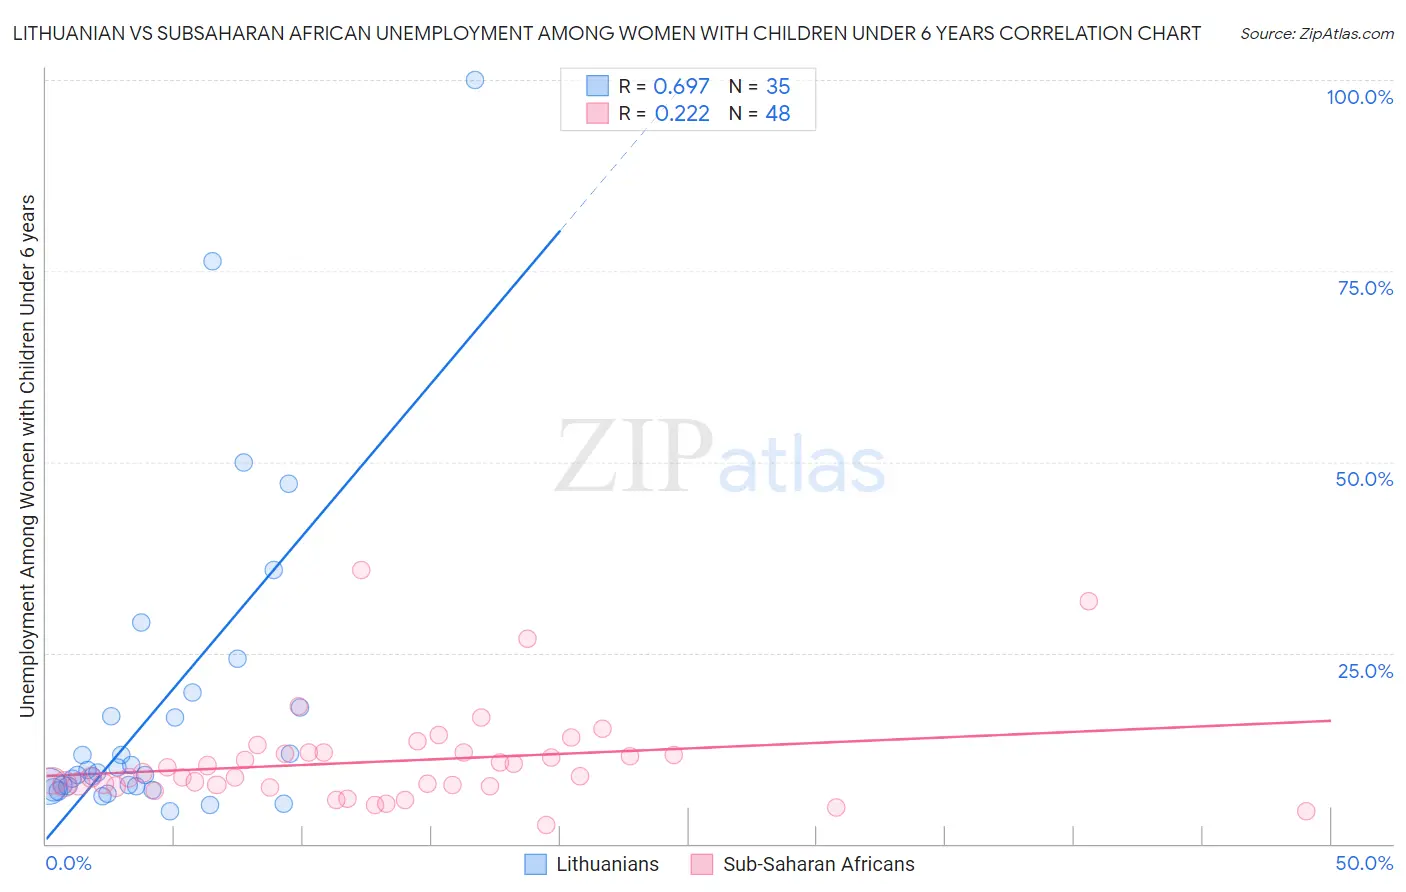 Lithuanian vs Subsaharan African Unemployment Among Women with Children Under 6 years